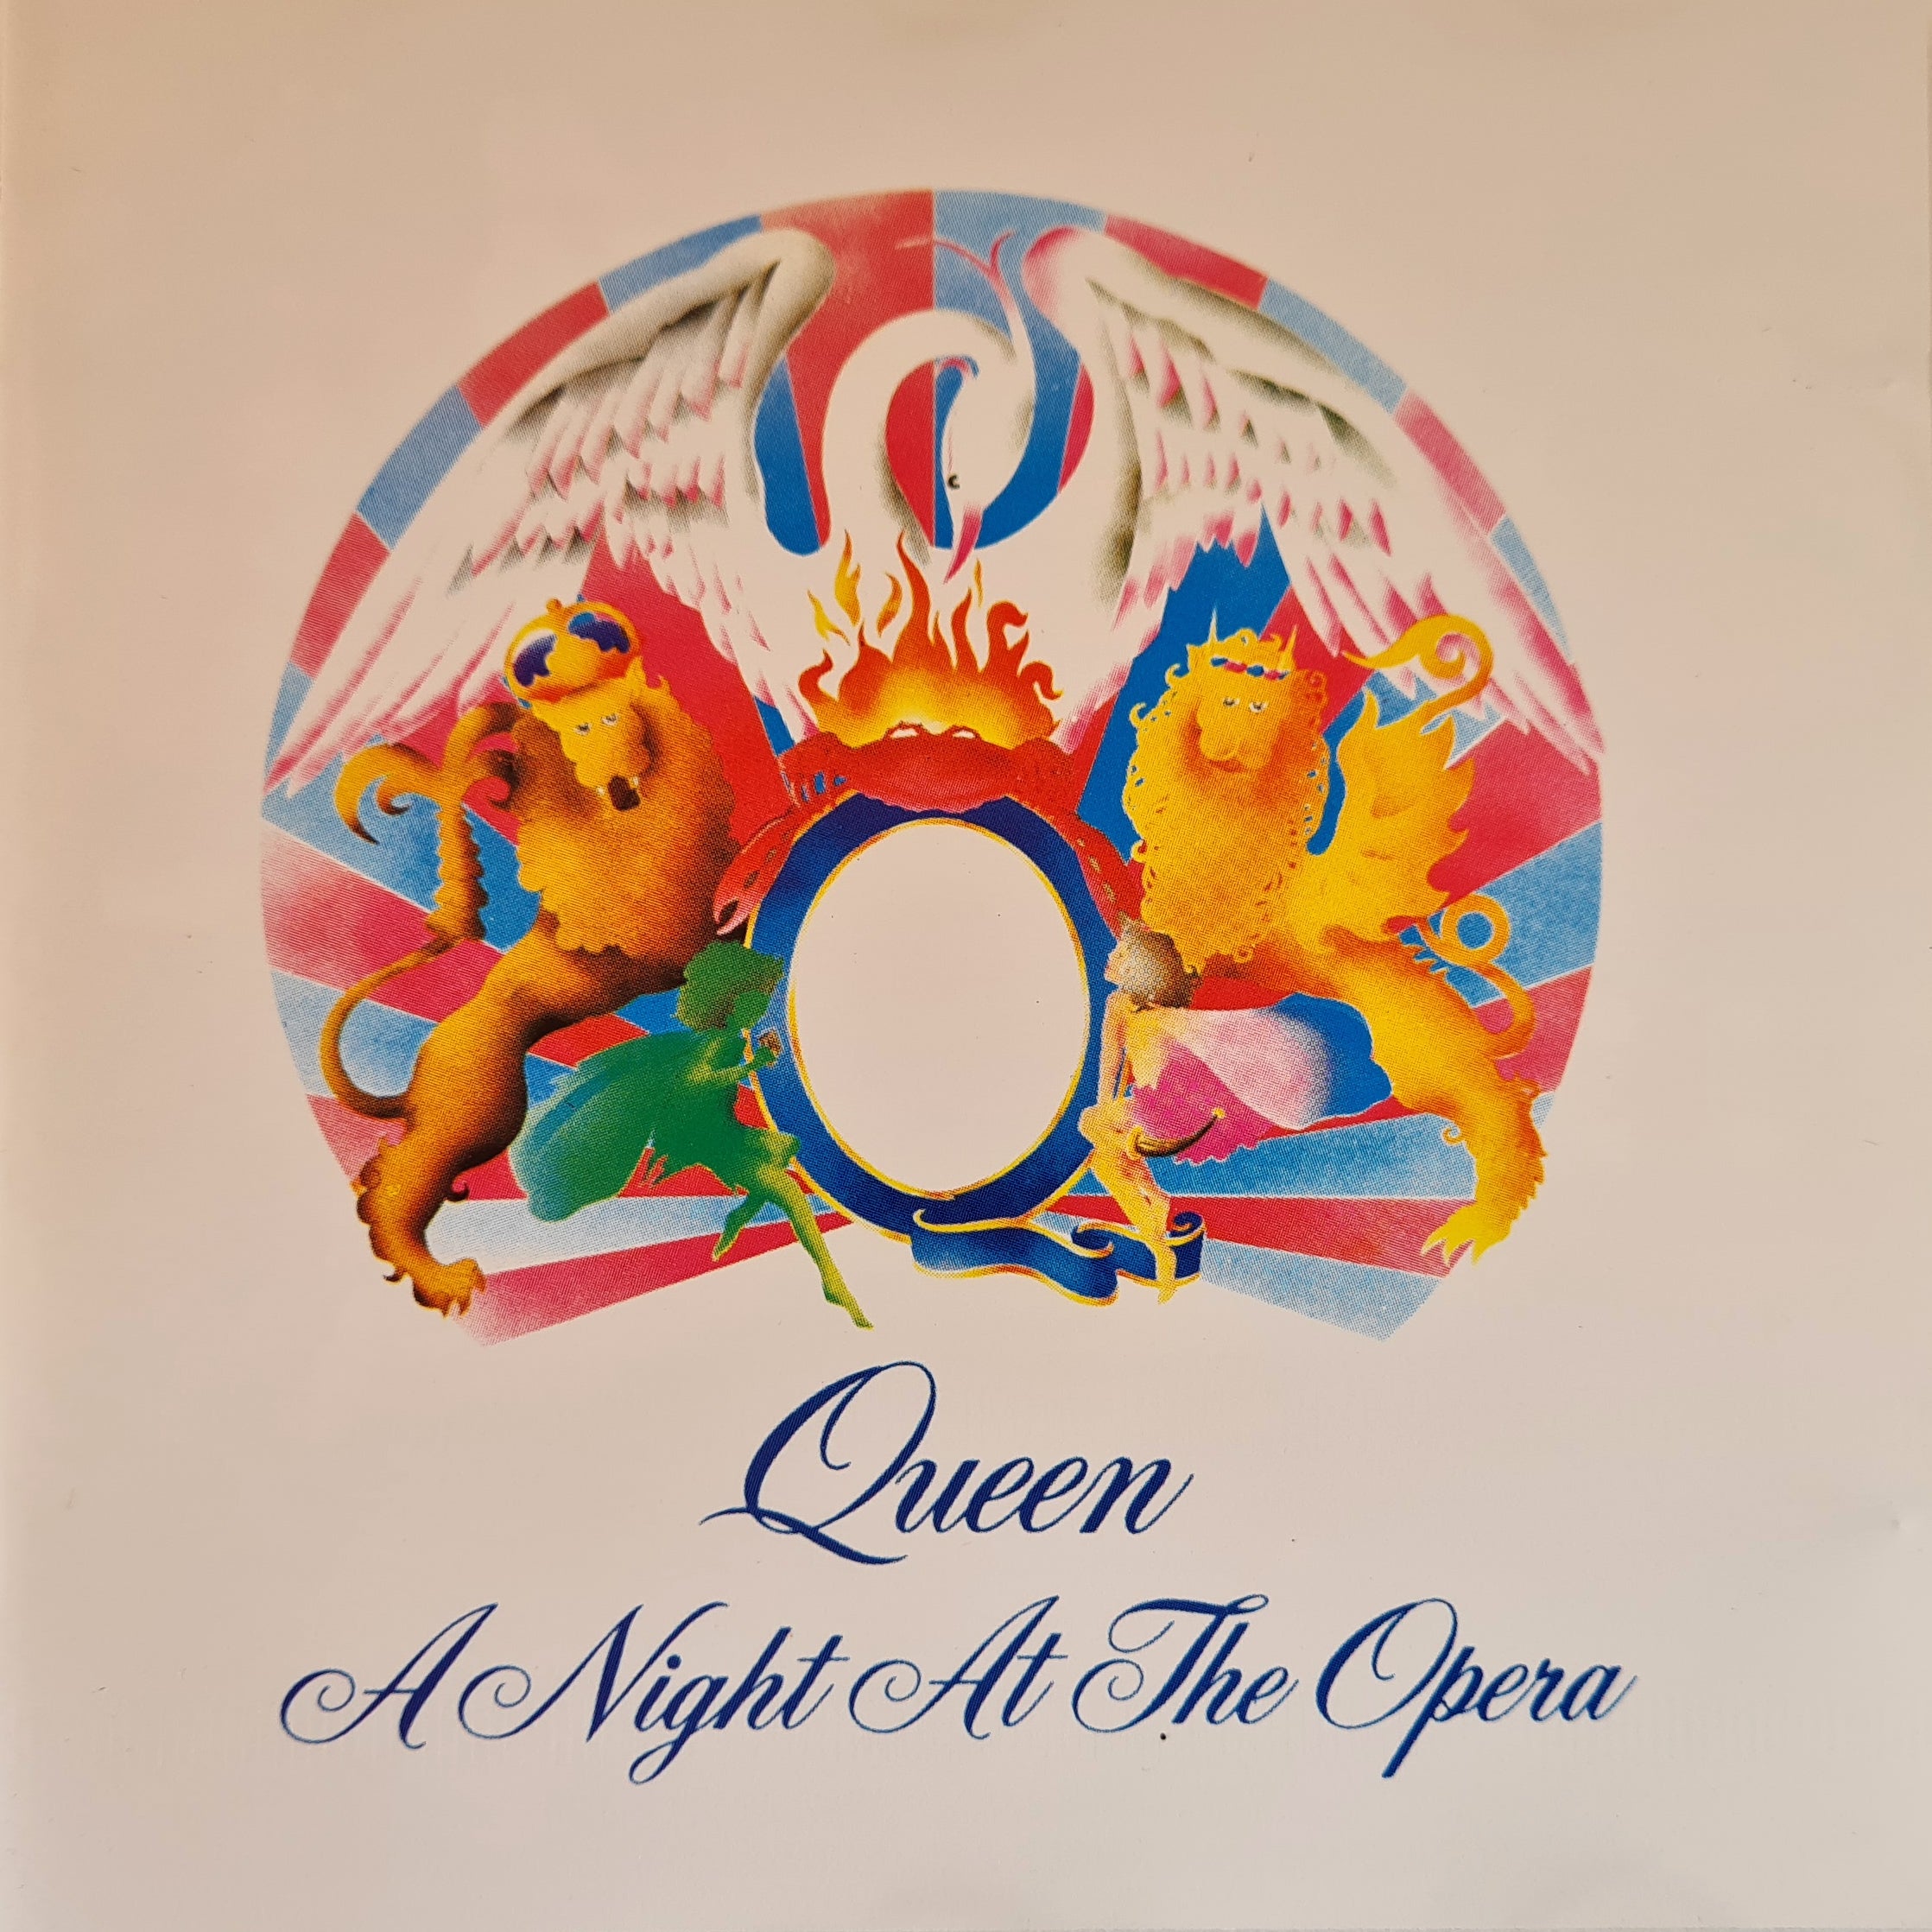 Queen - A Night at the Opera (CD)